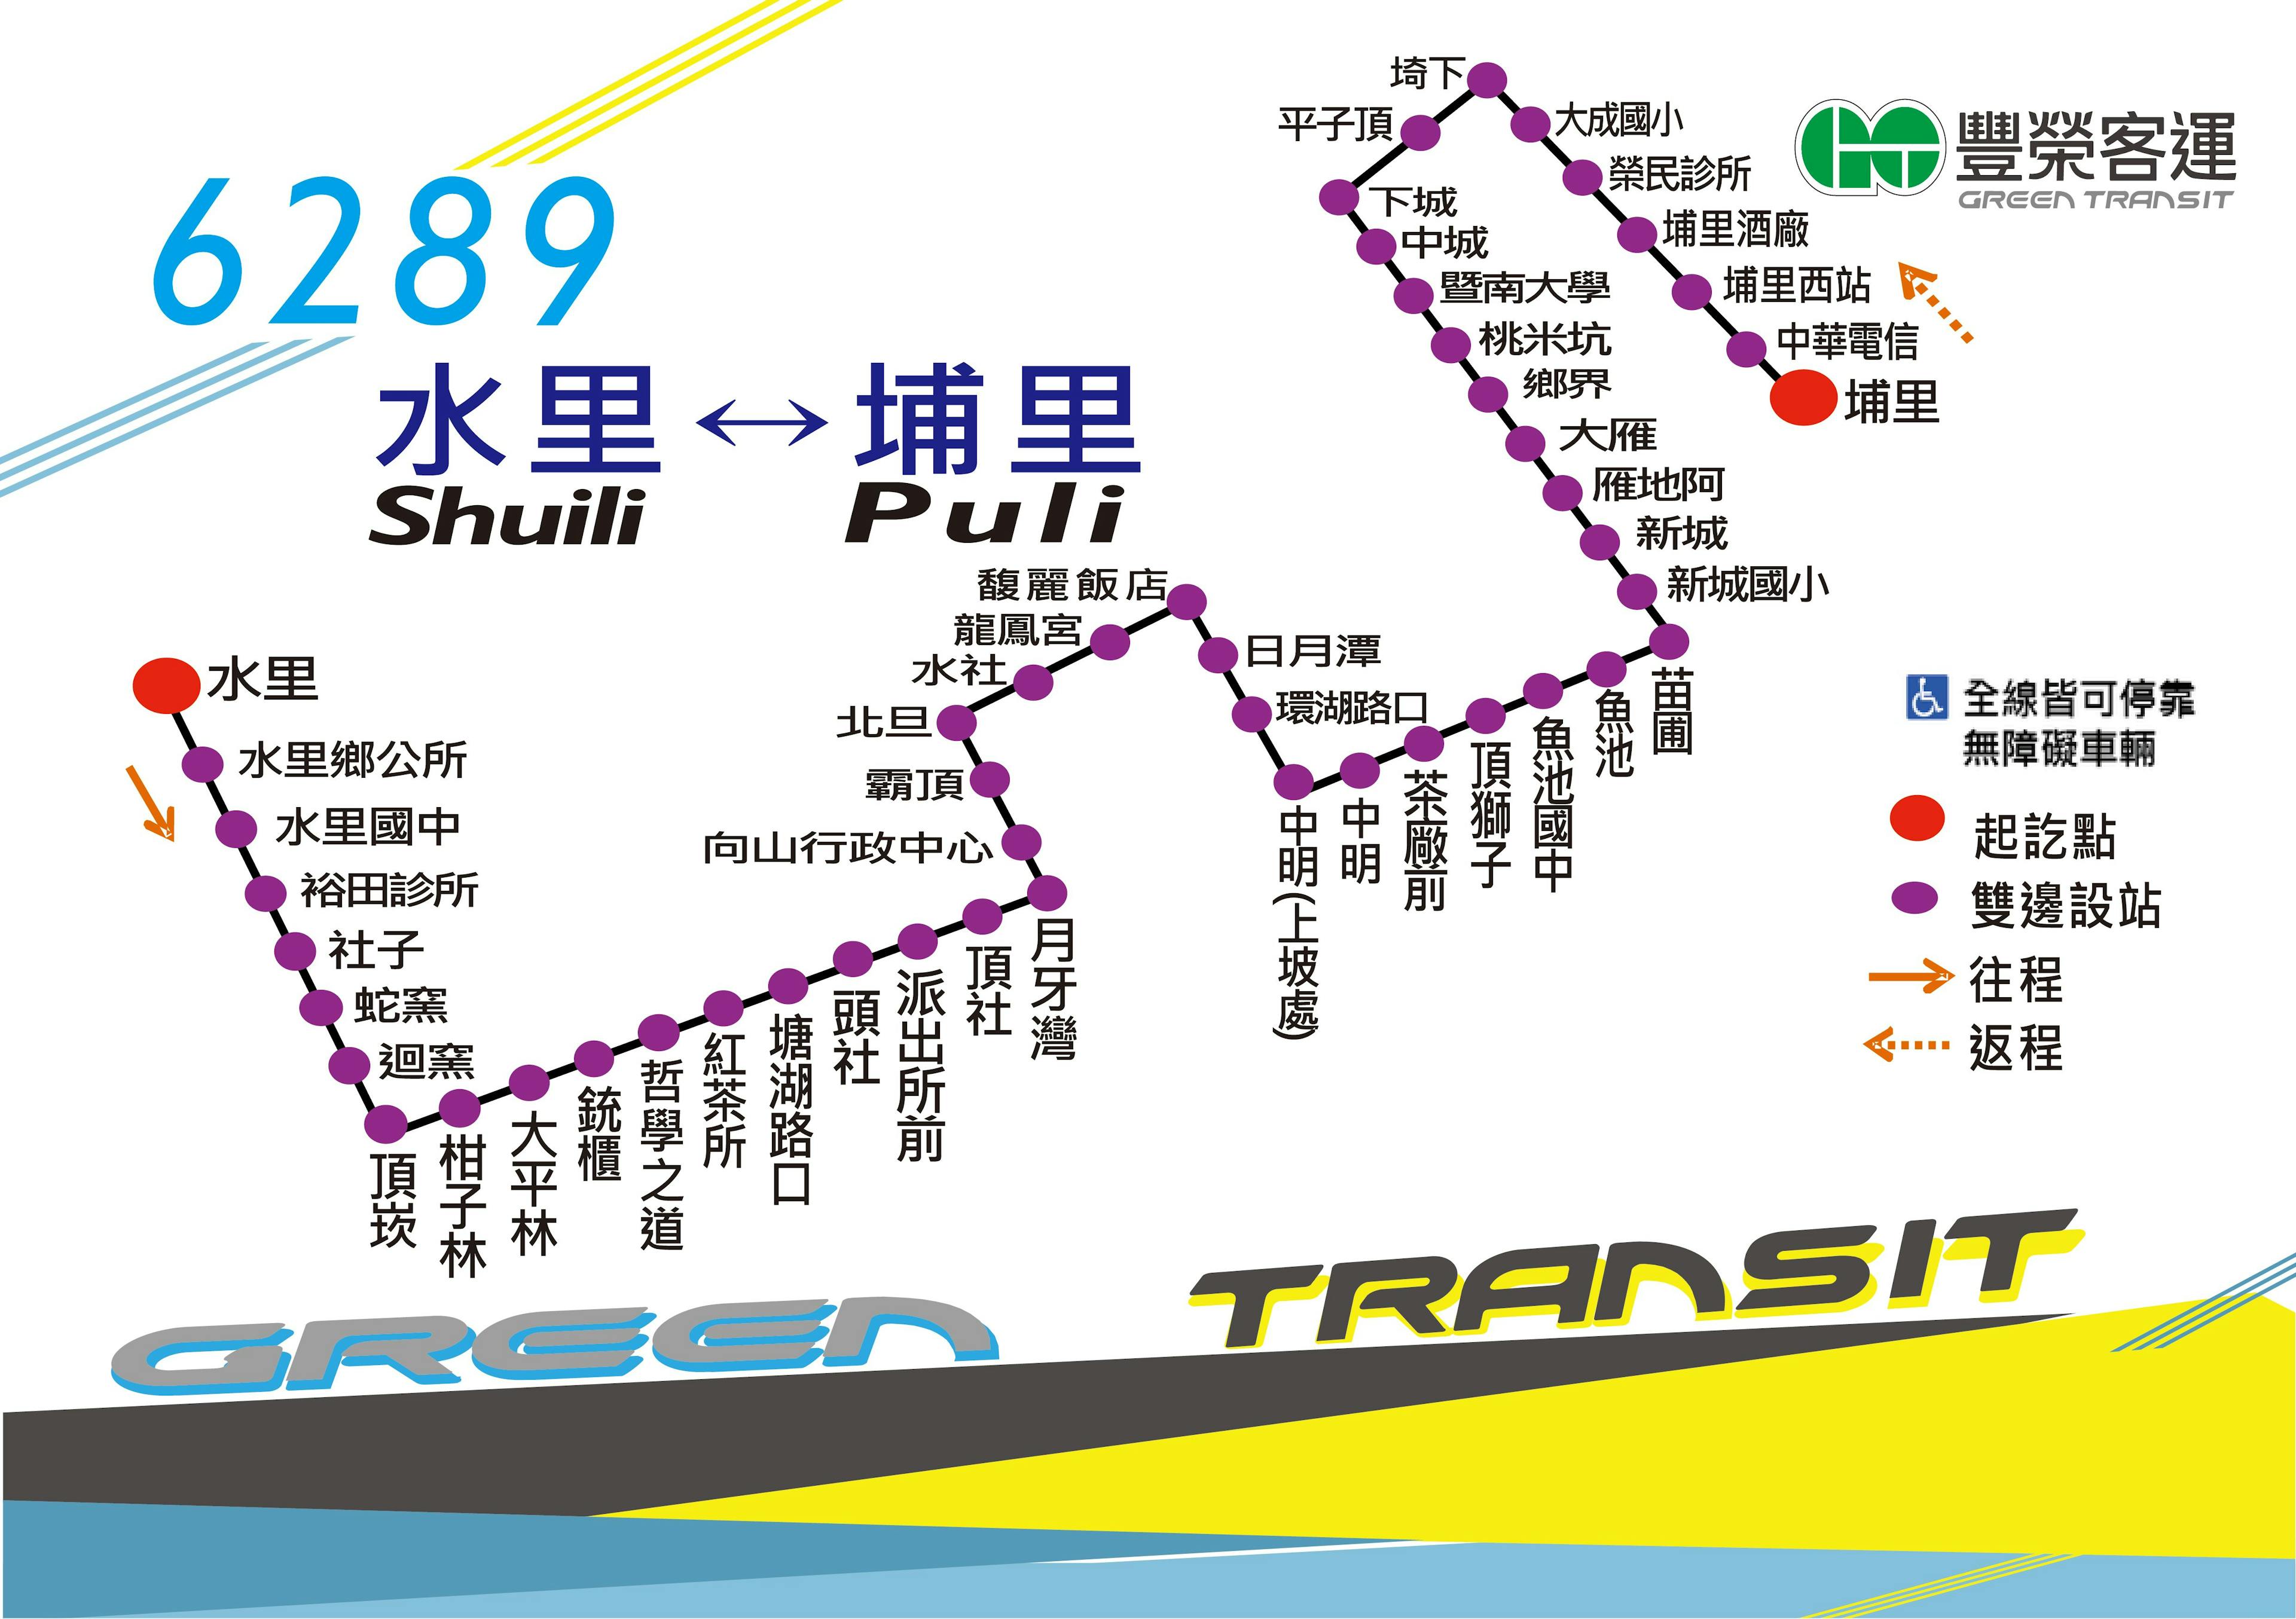 6289Route Map-Green Transit Bus